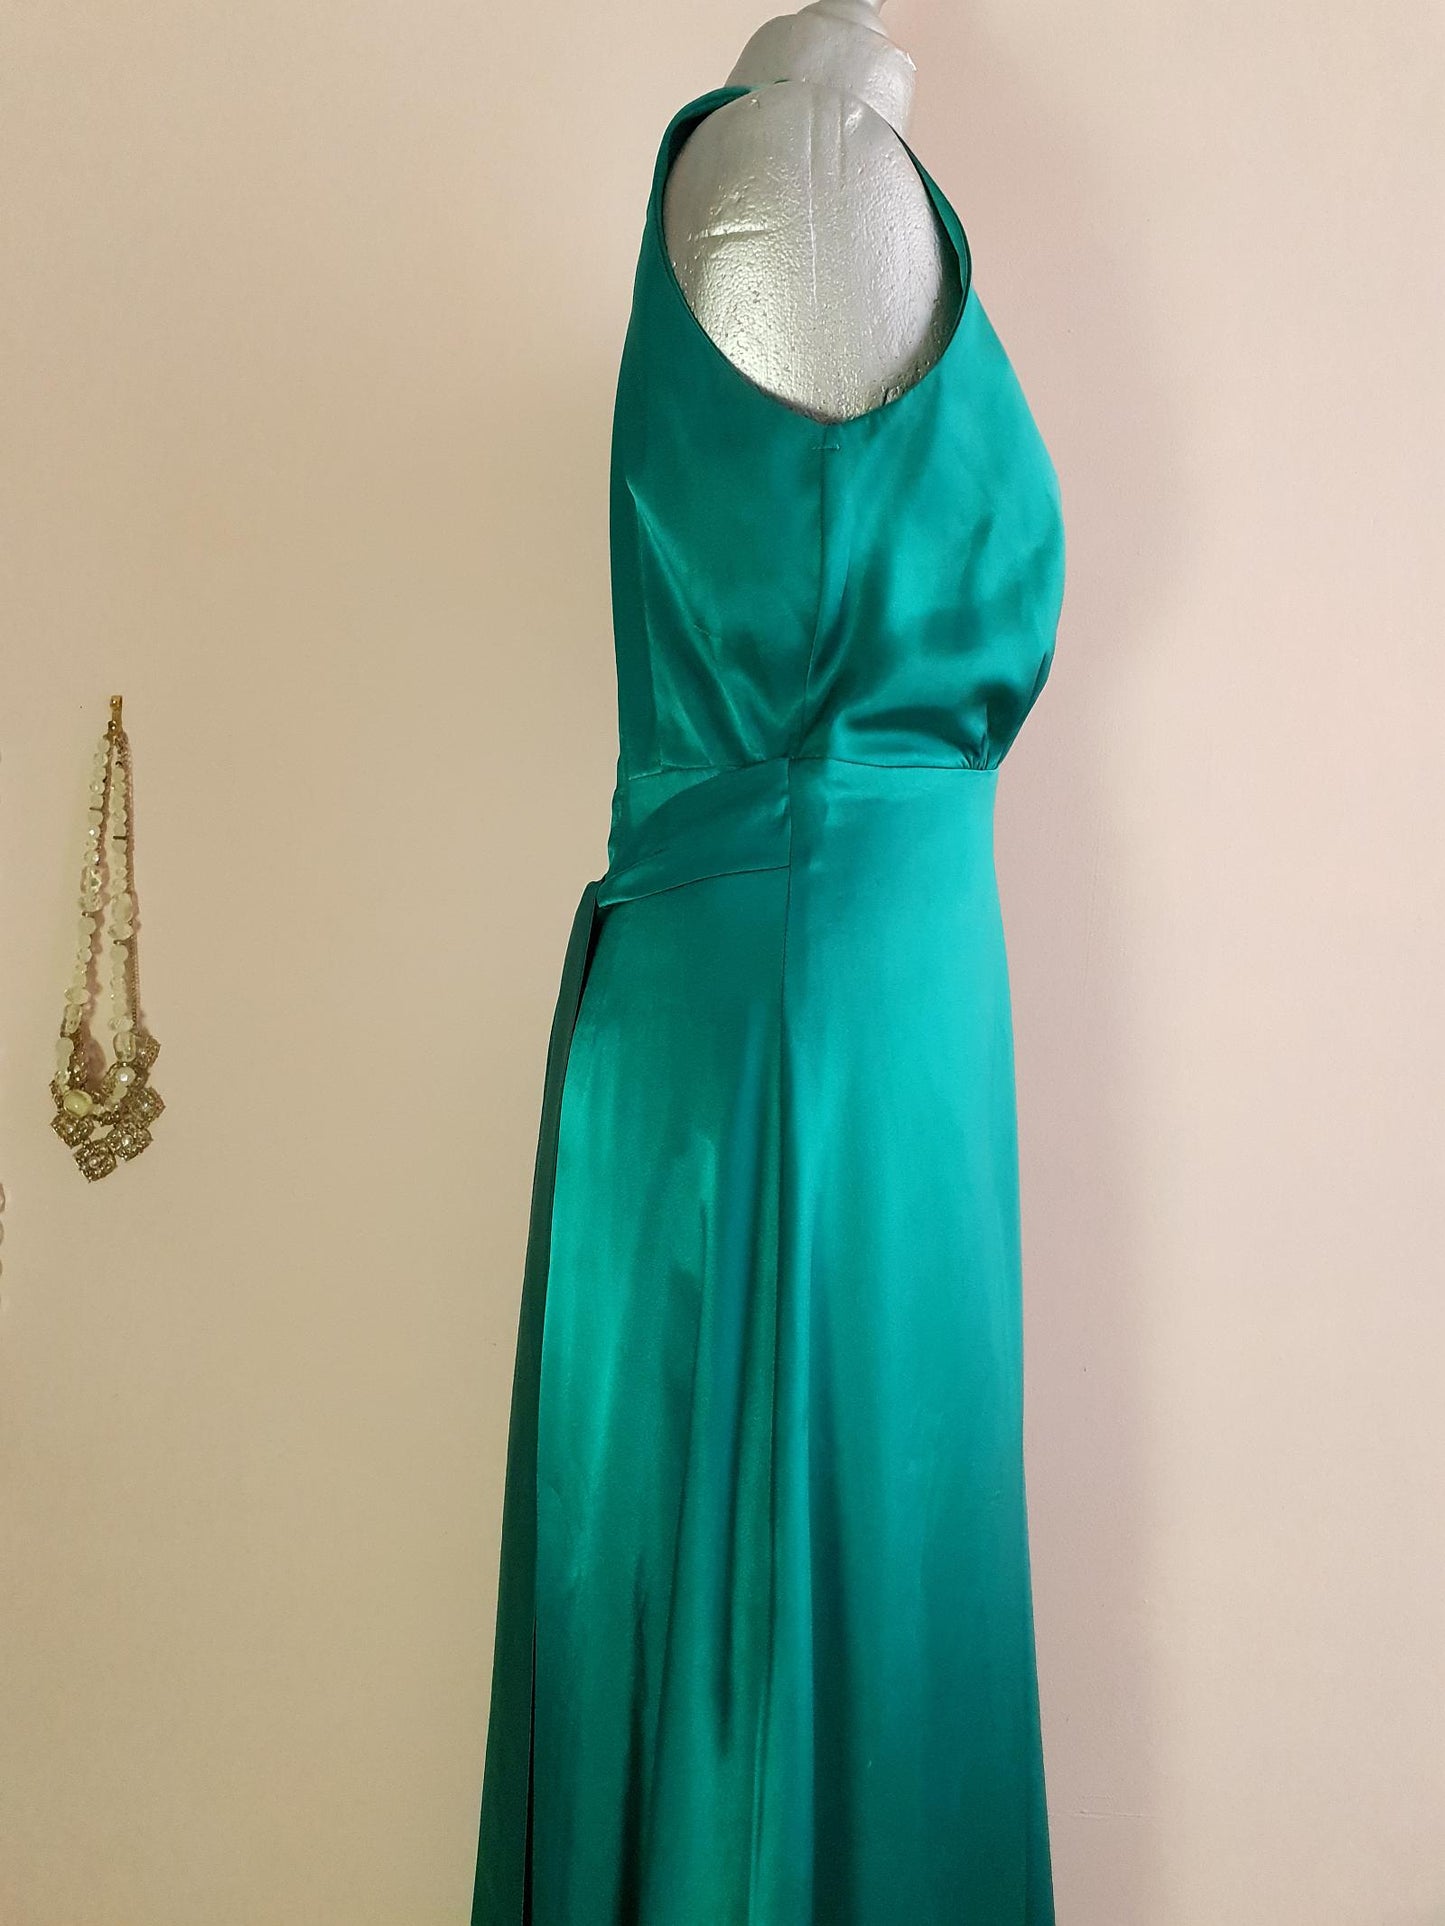 Beautiful 1980s Vintage Emerald Green Satin Hollywood Evening Gown Dress - Size 10